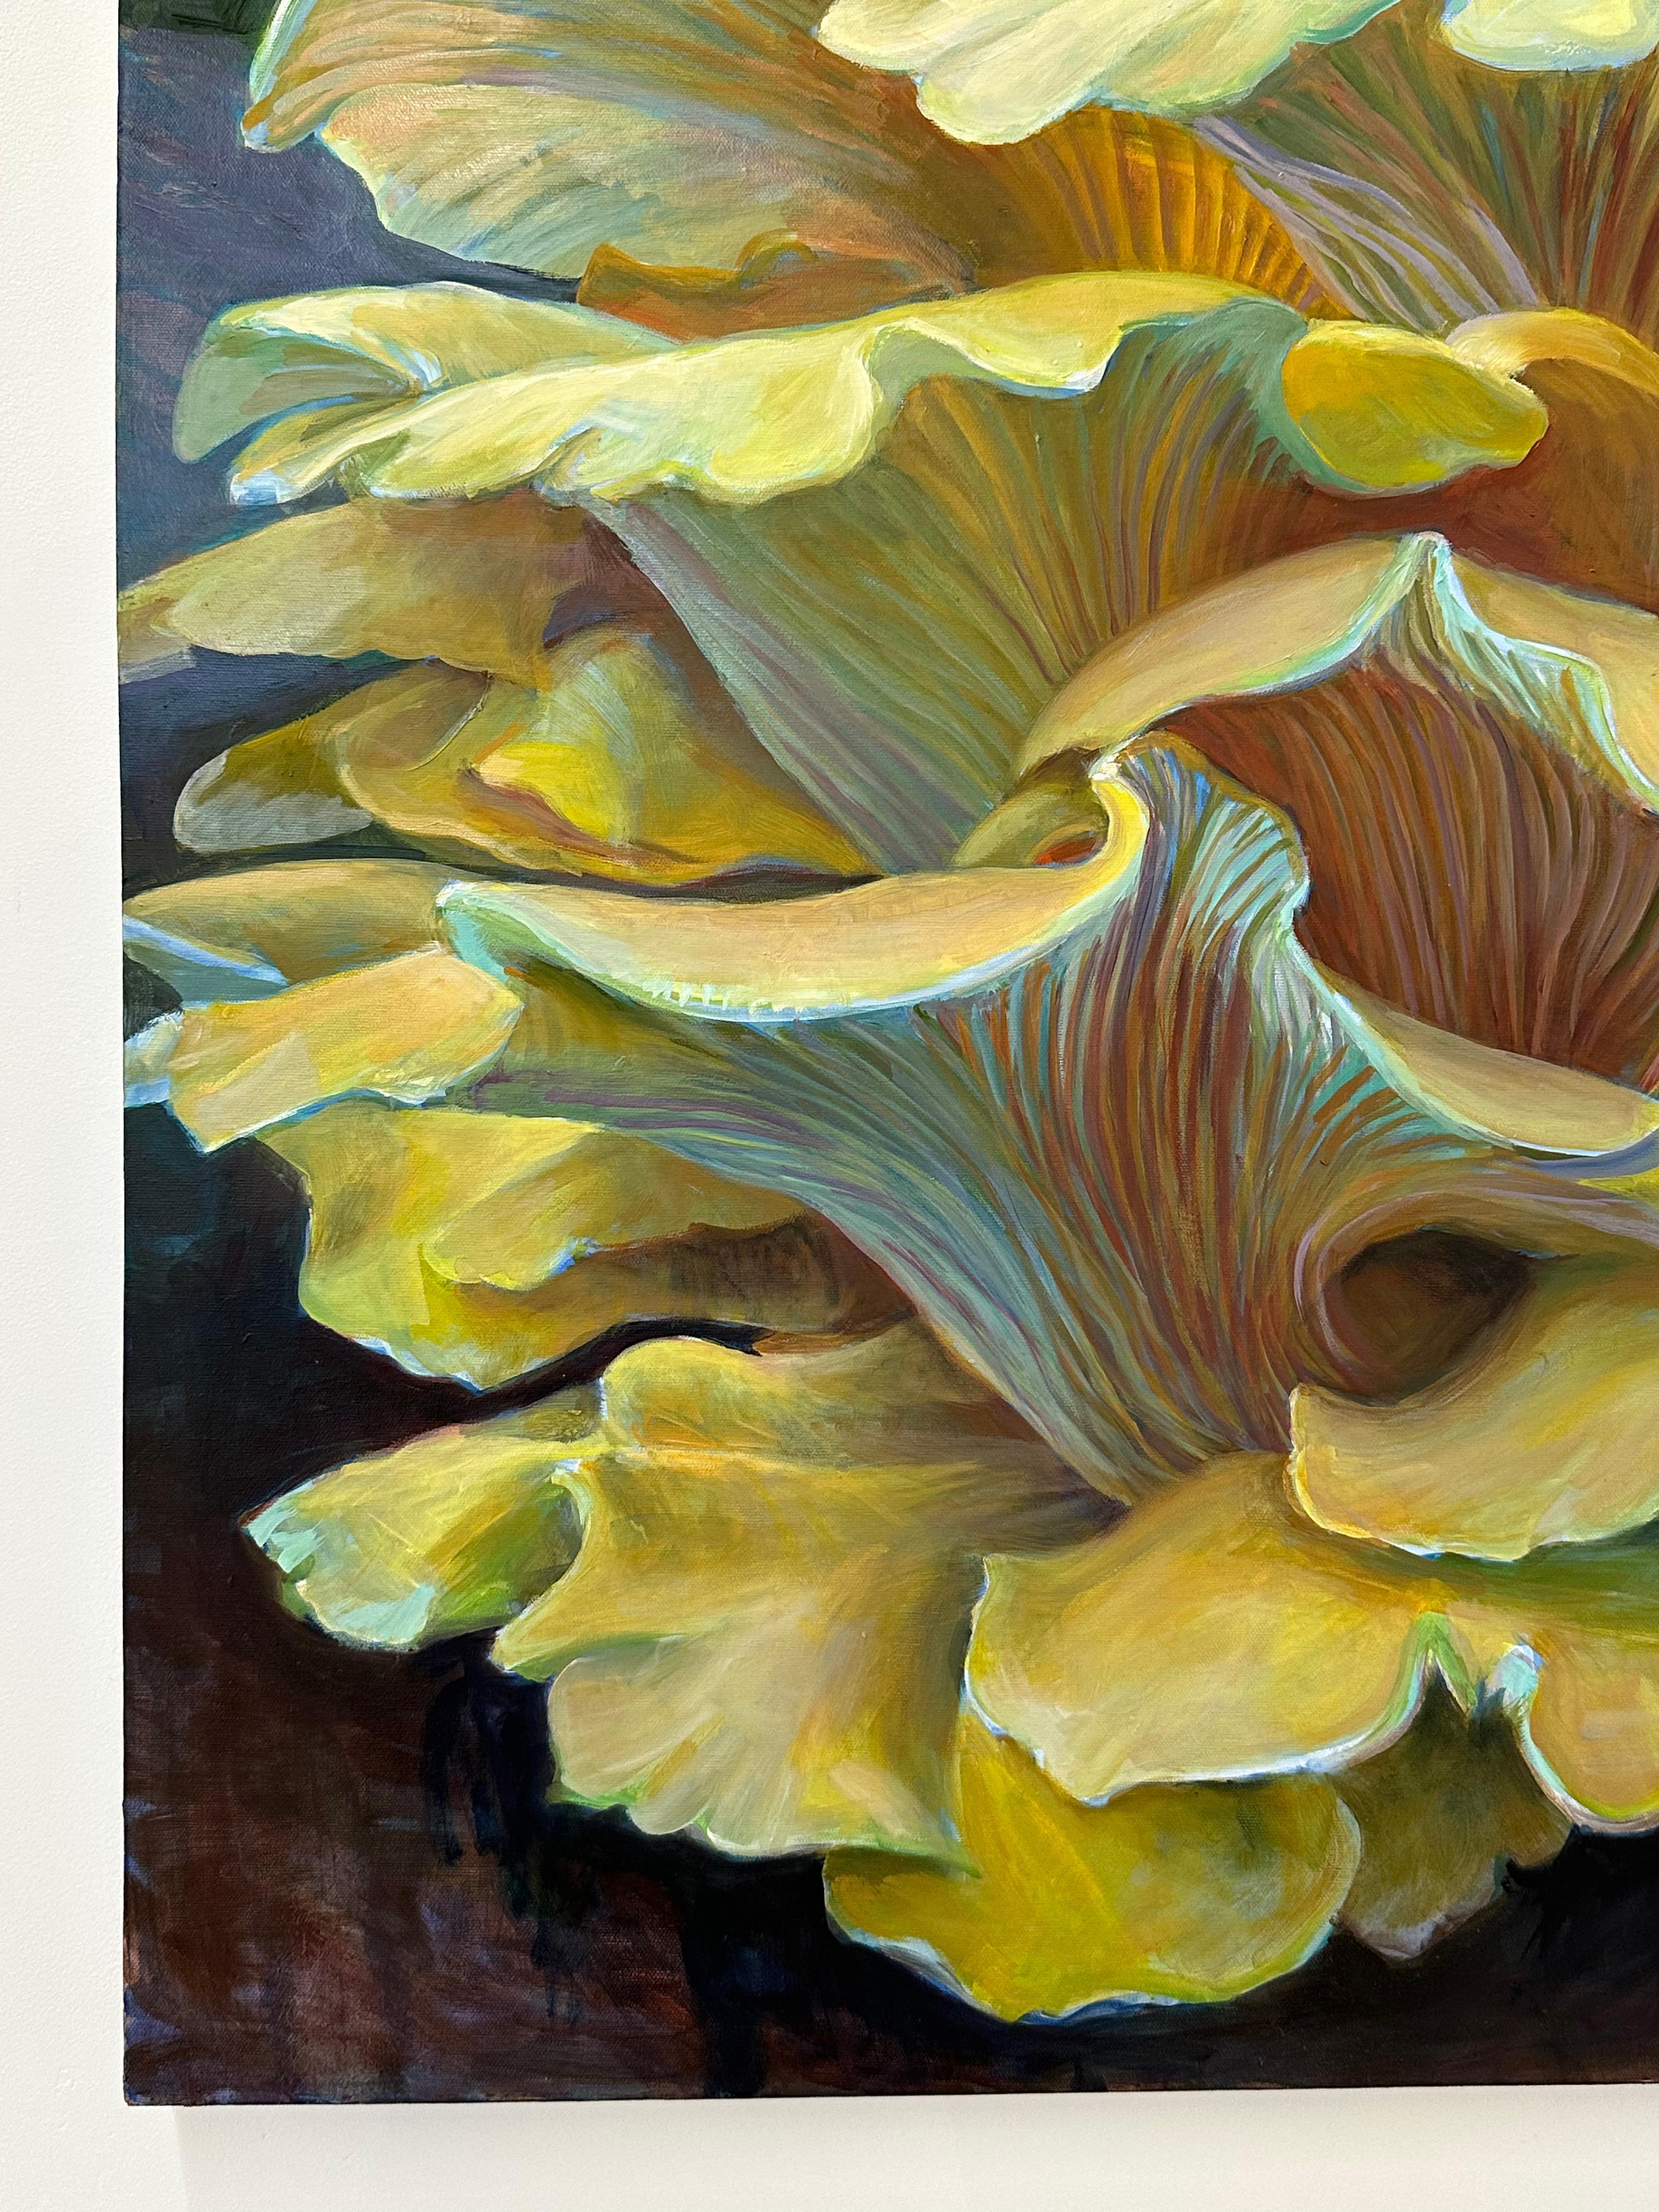 A golden oyster mushroom in hues of yellow, ochre and orange, with hints of light blue, is masterfully painted, arranged in a dynamic, asymmetrical composition, luminous against a dark violet and green background. Signed, dated and titled on